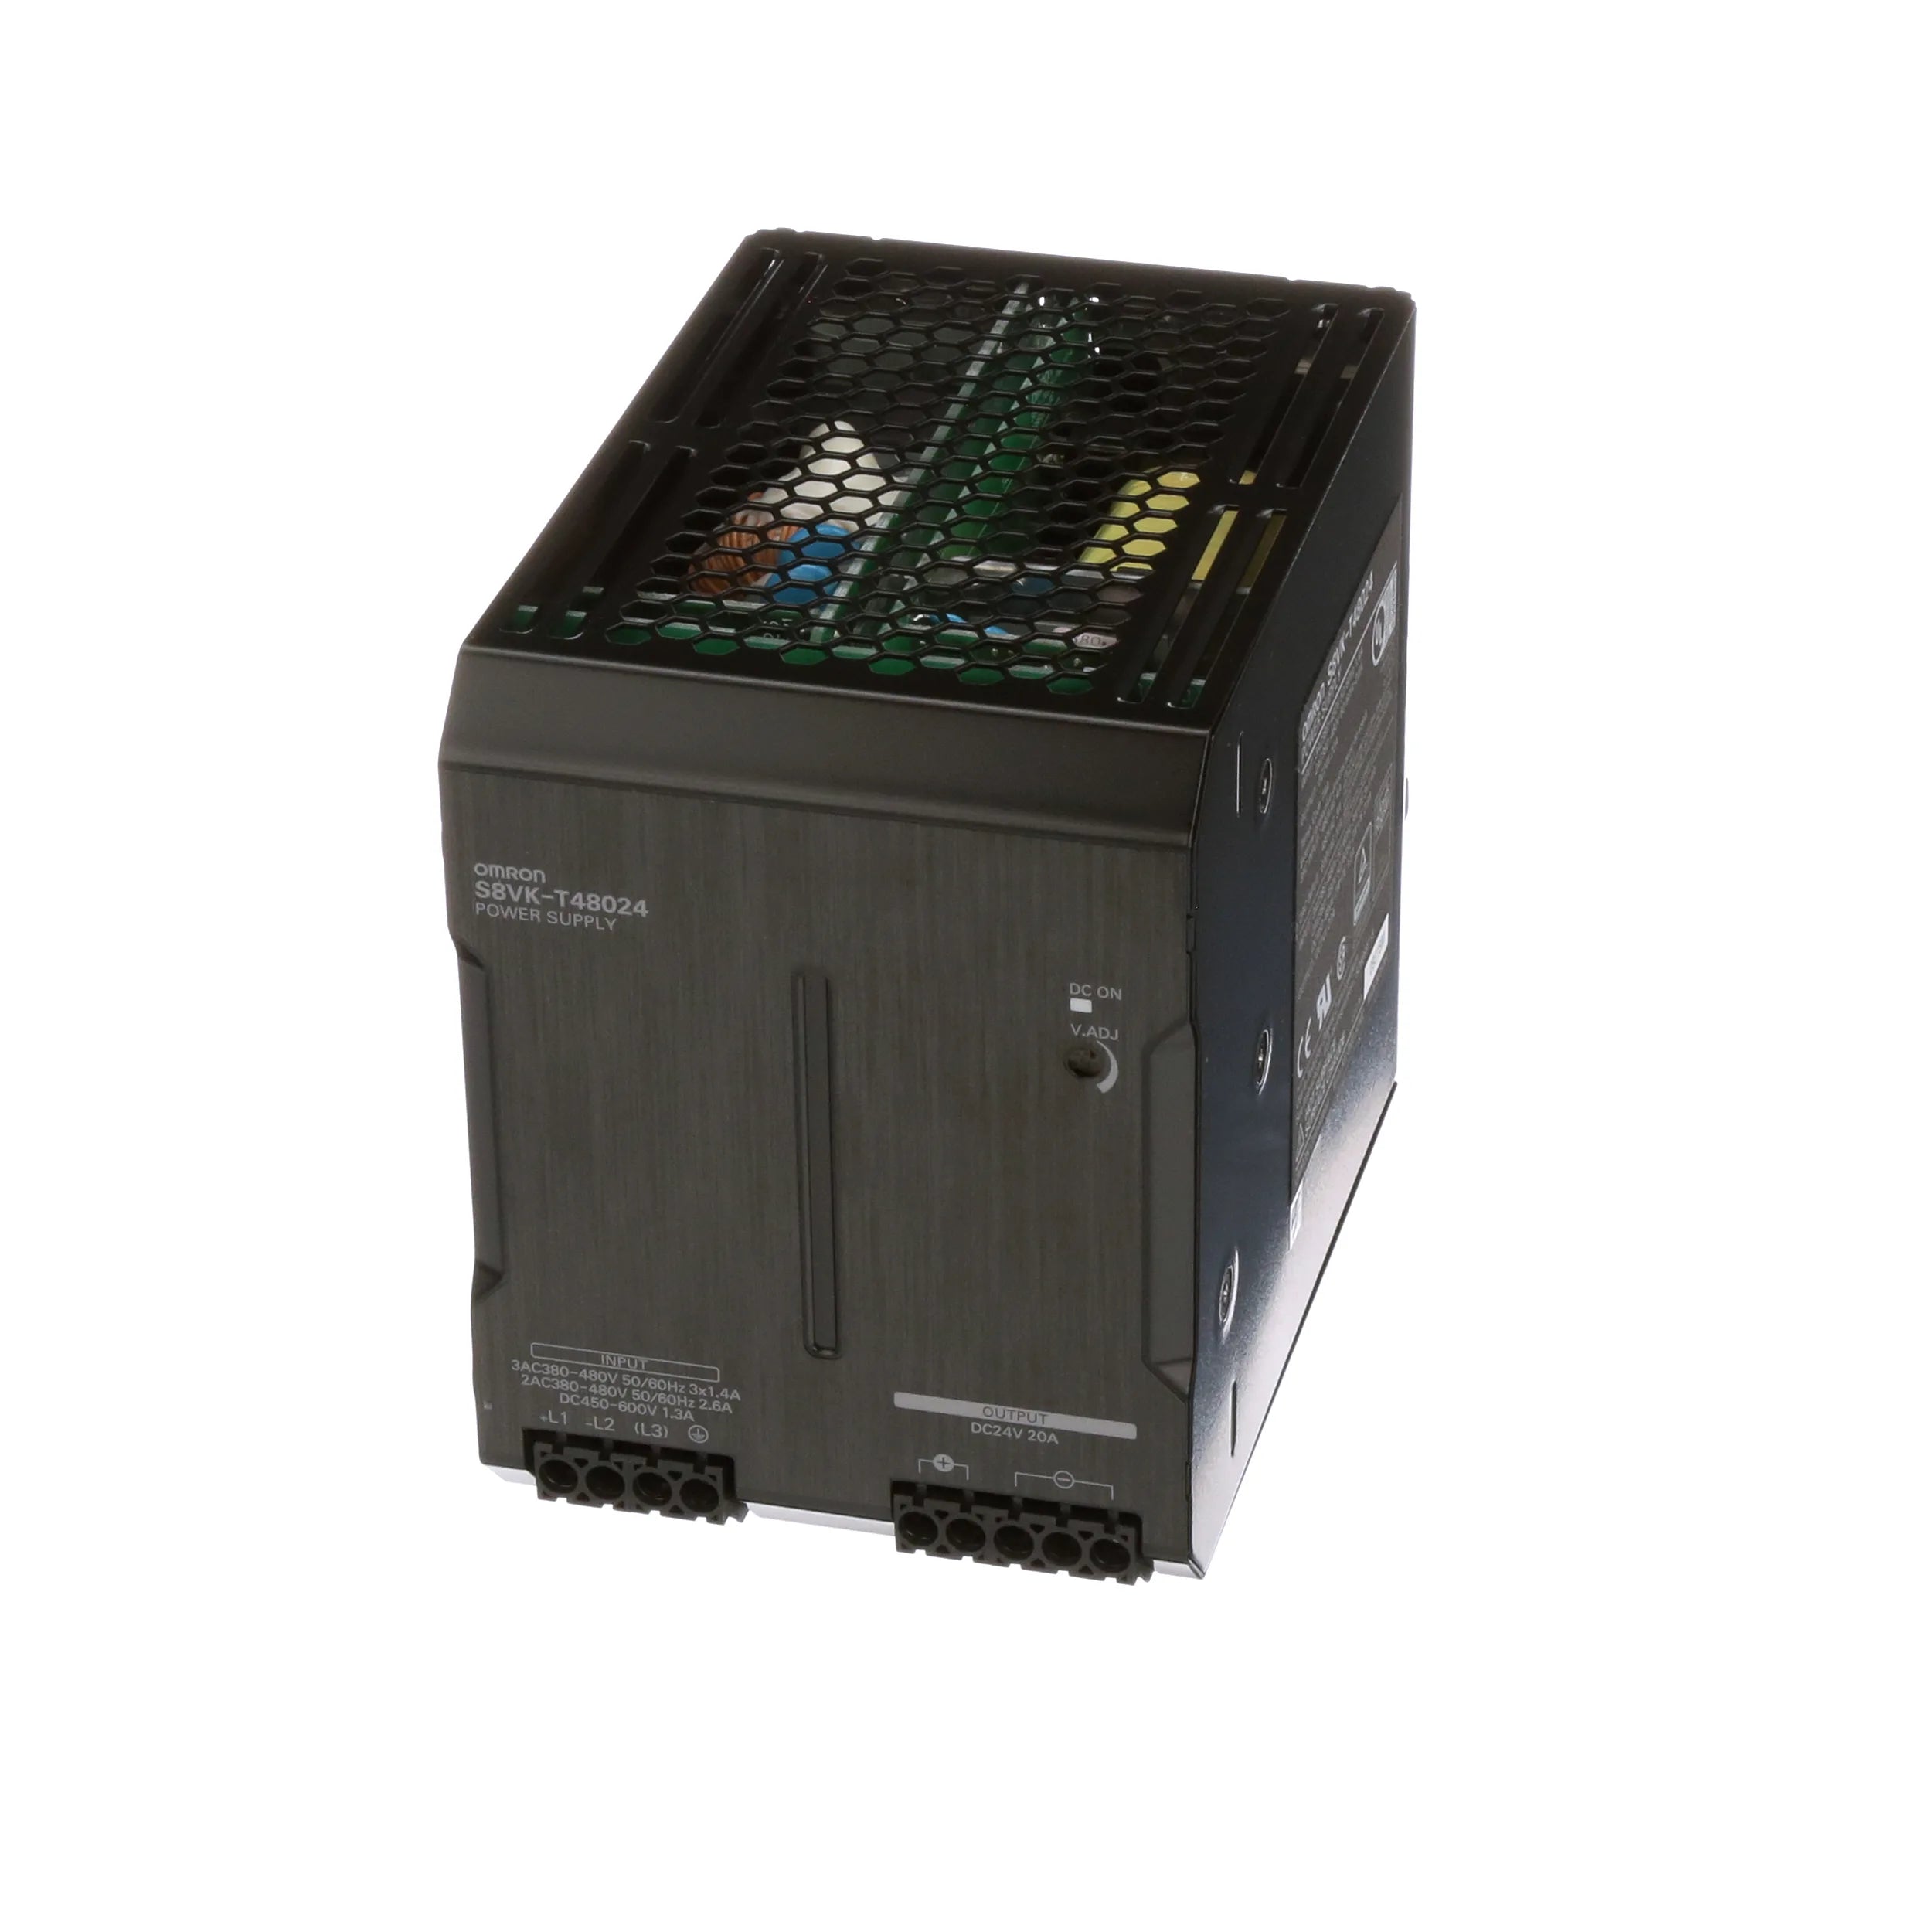 S8VK-T48024 | Omron | Power Supply